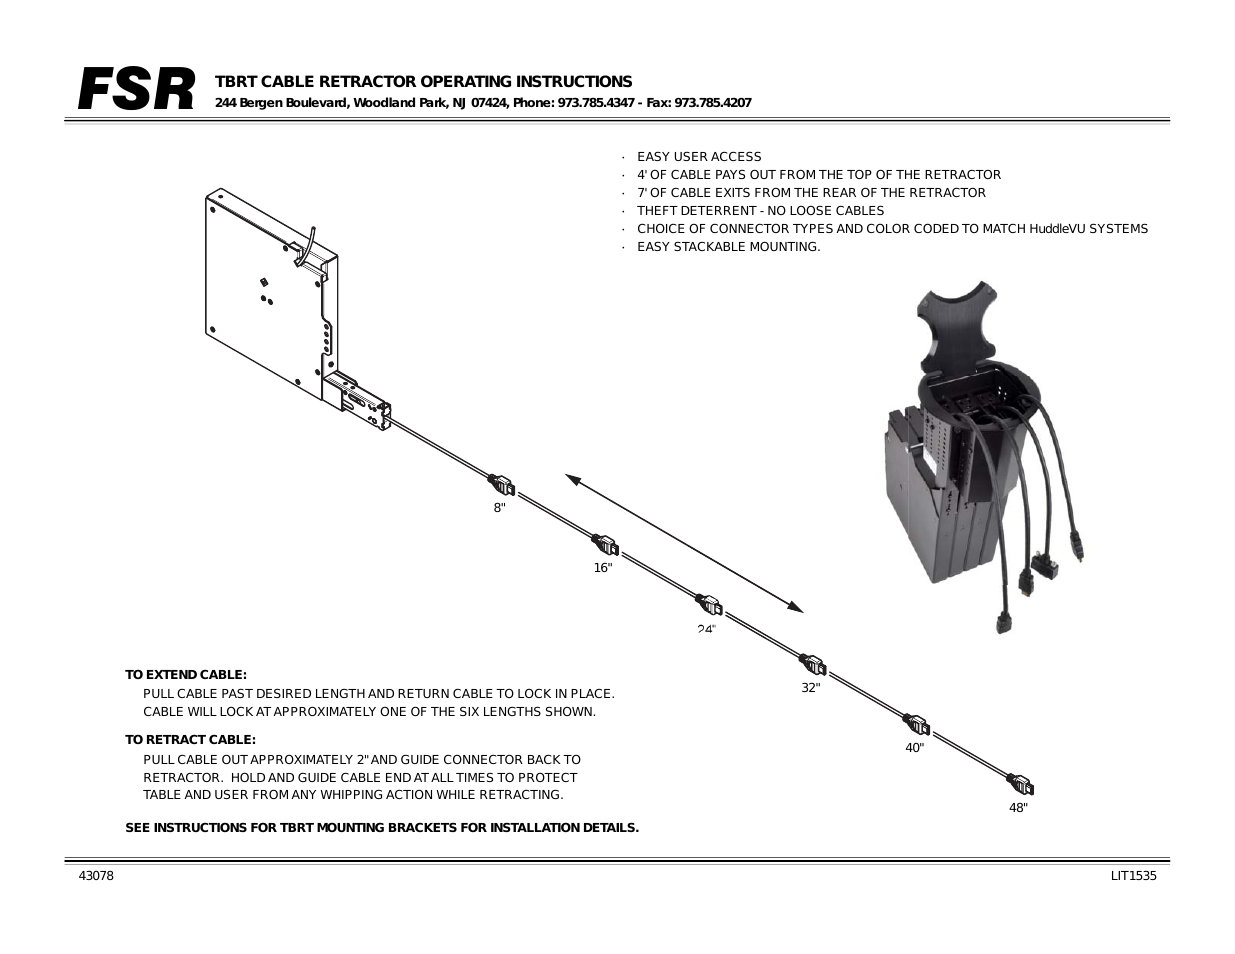 TBRT CABLE RETRACTOR Operating Instructions